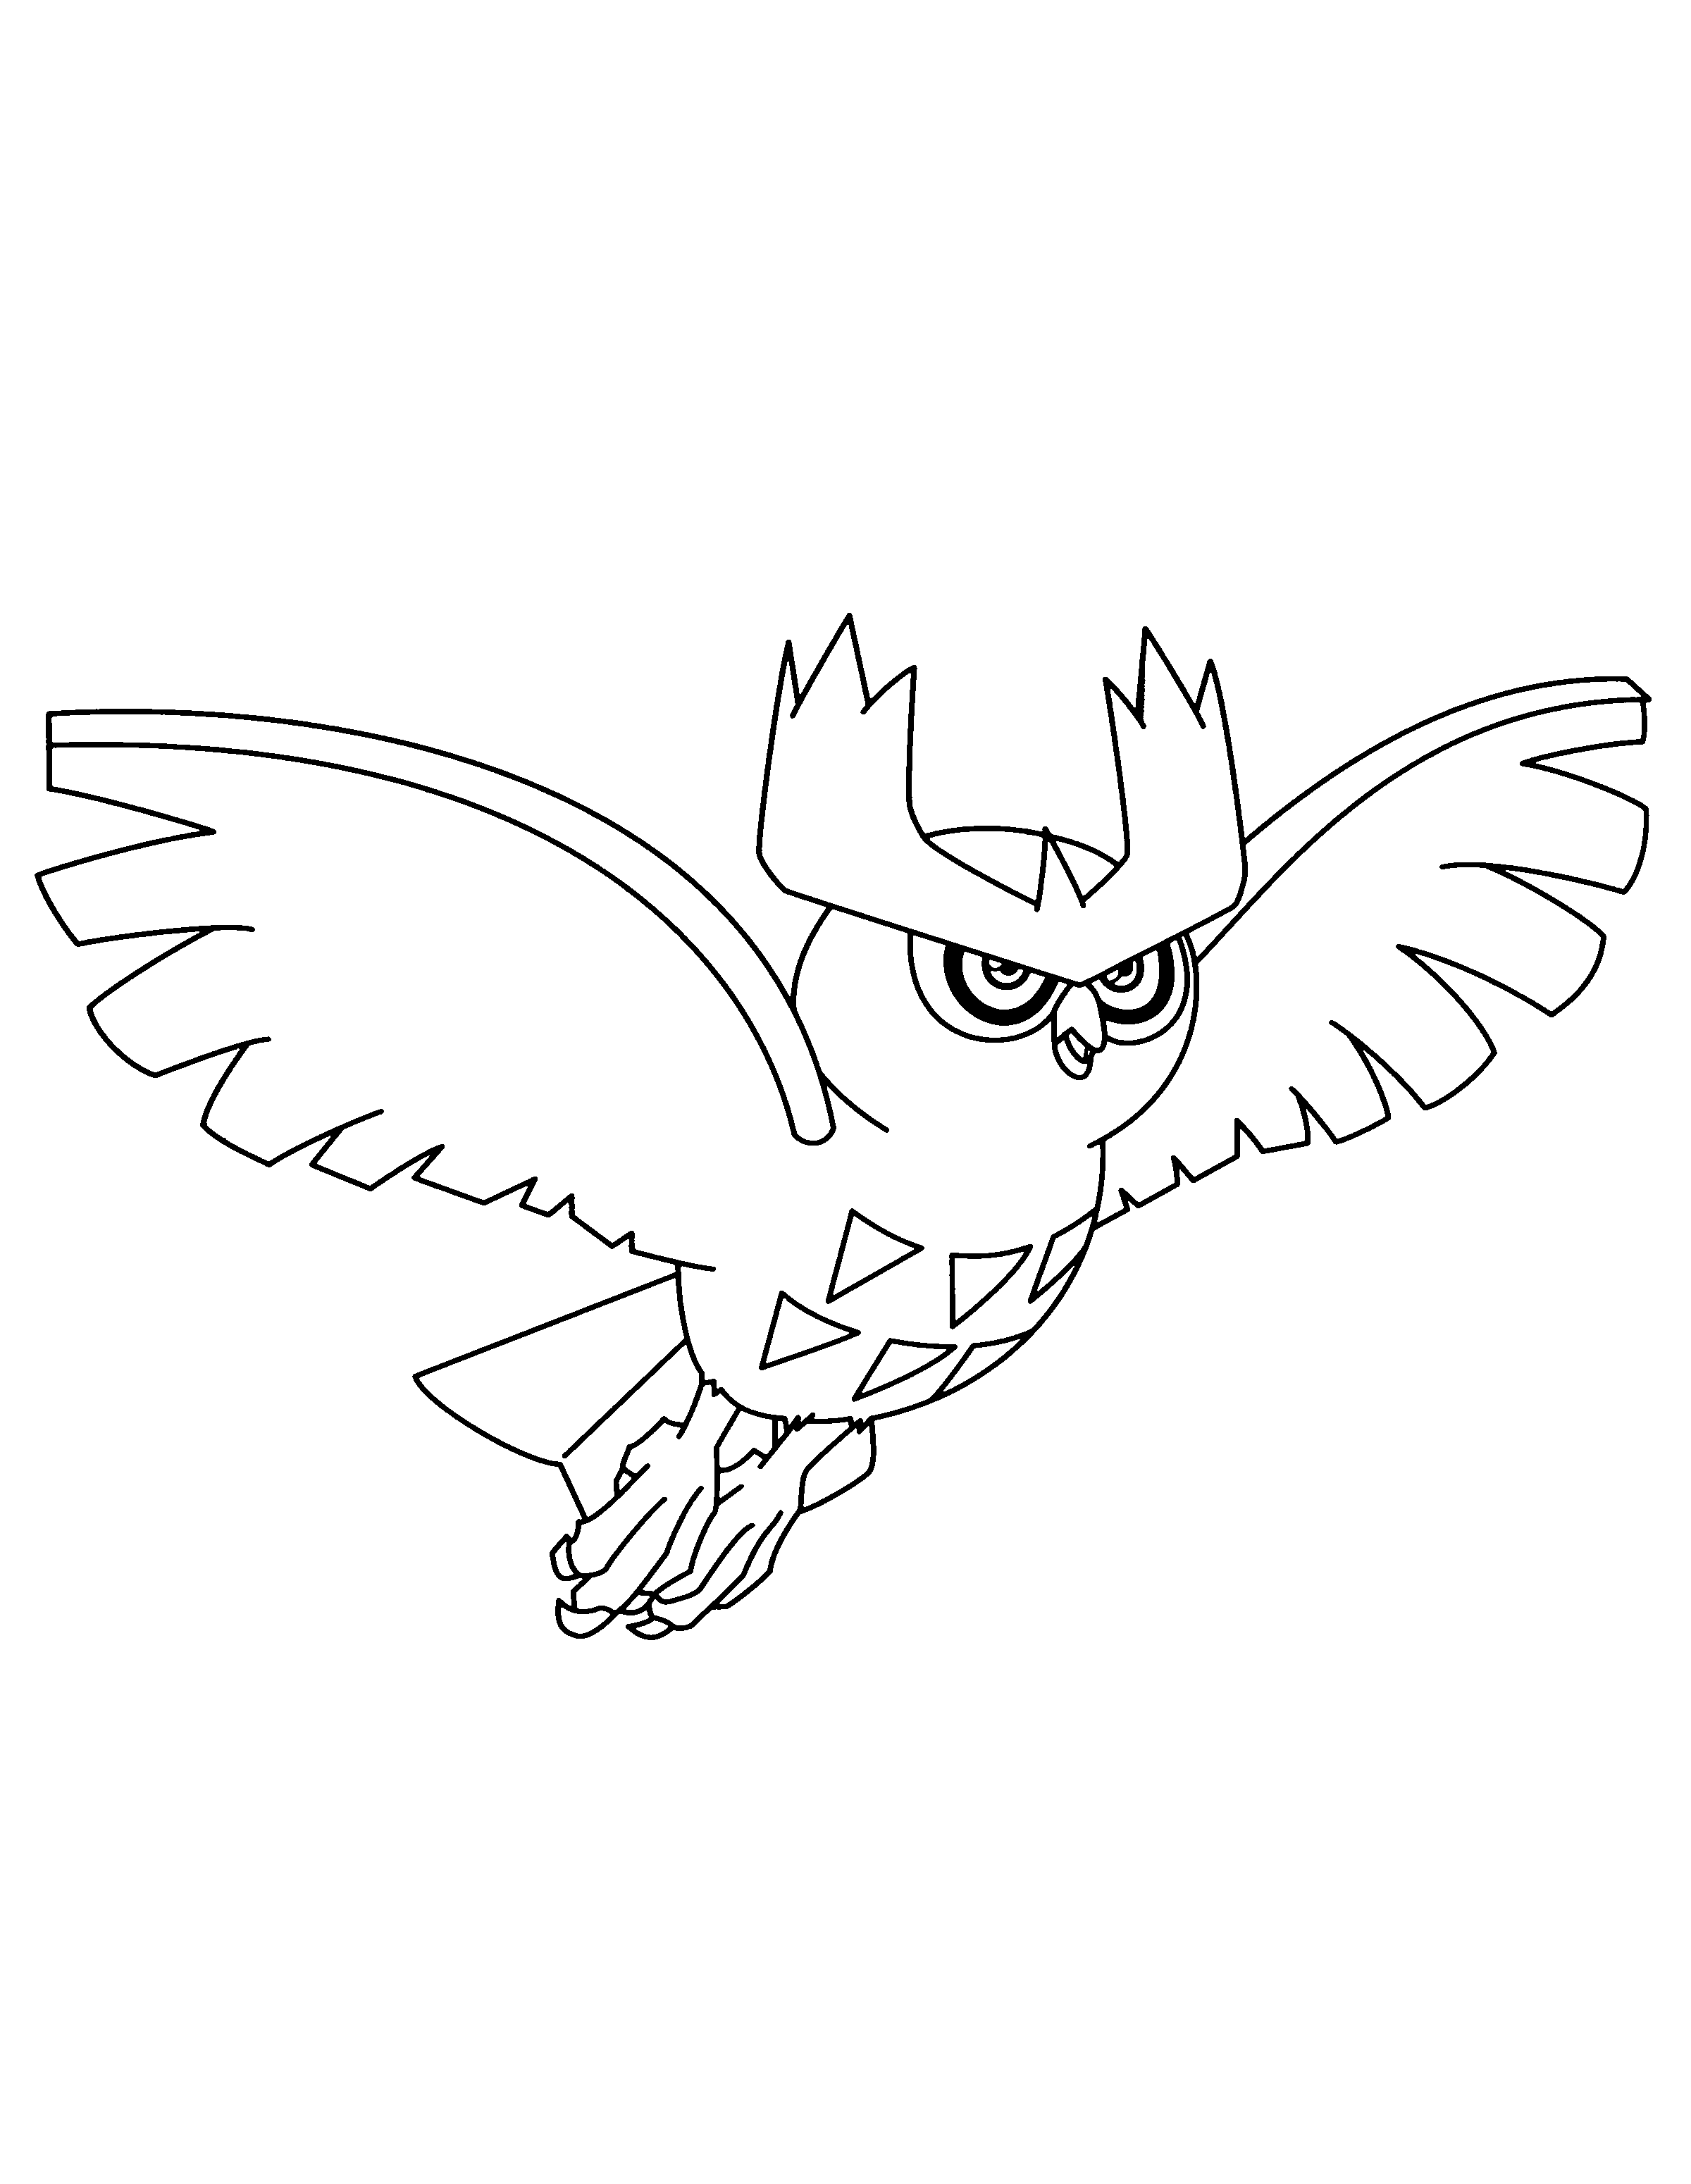 animated-coloring-pages-pokemon-image-0176